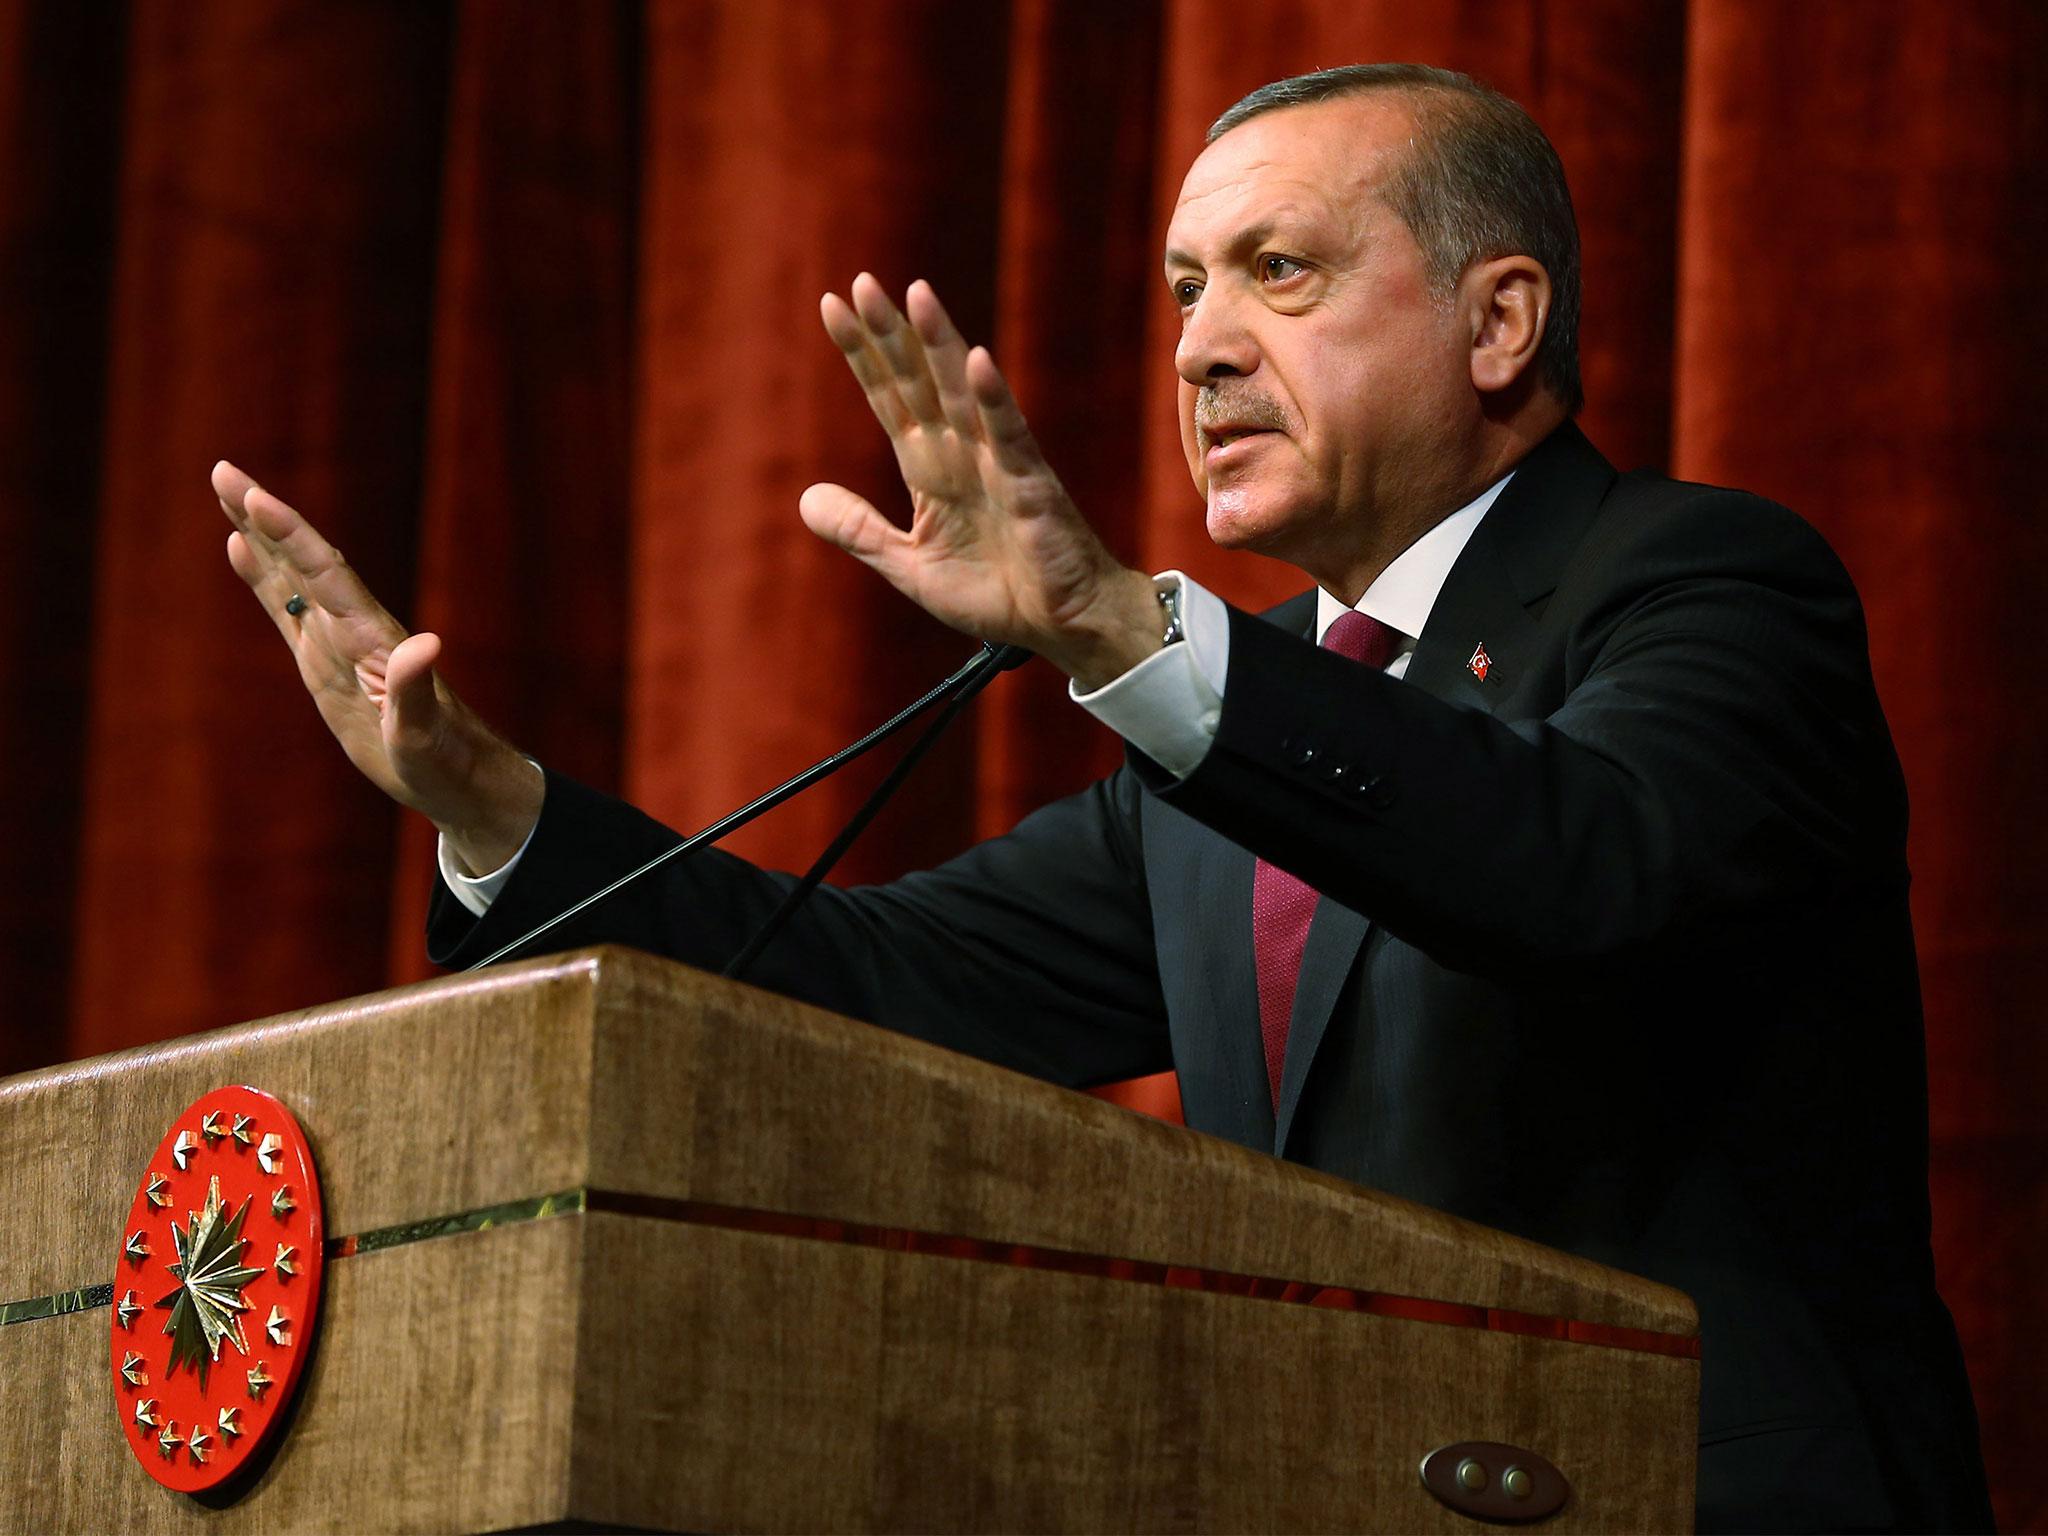 President Recep Tayyip Erdogan delivers a speech commenting on those killed and wounded during the failed July 15 military coup